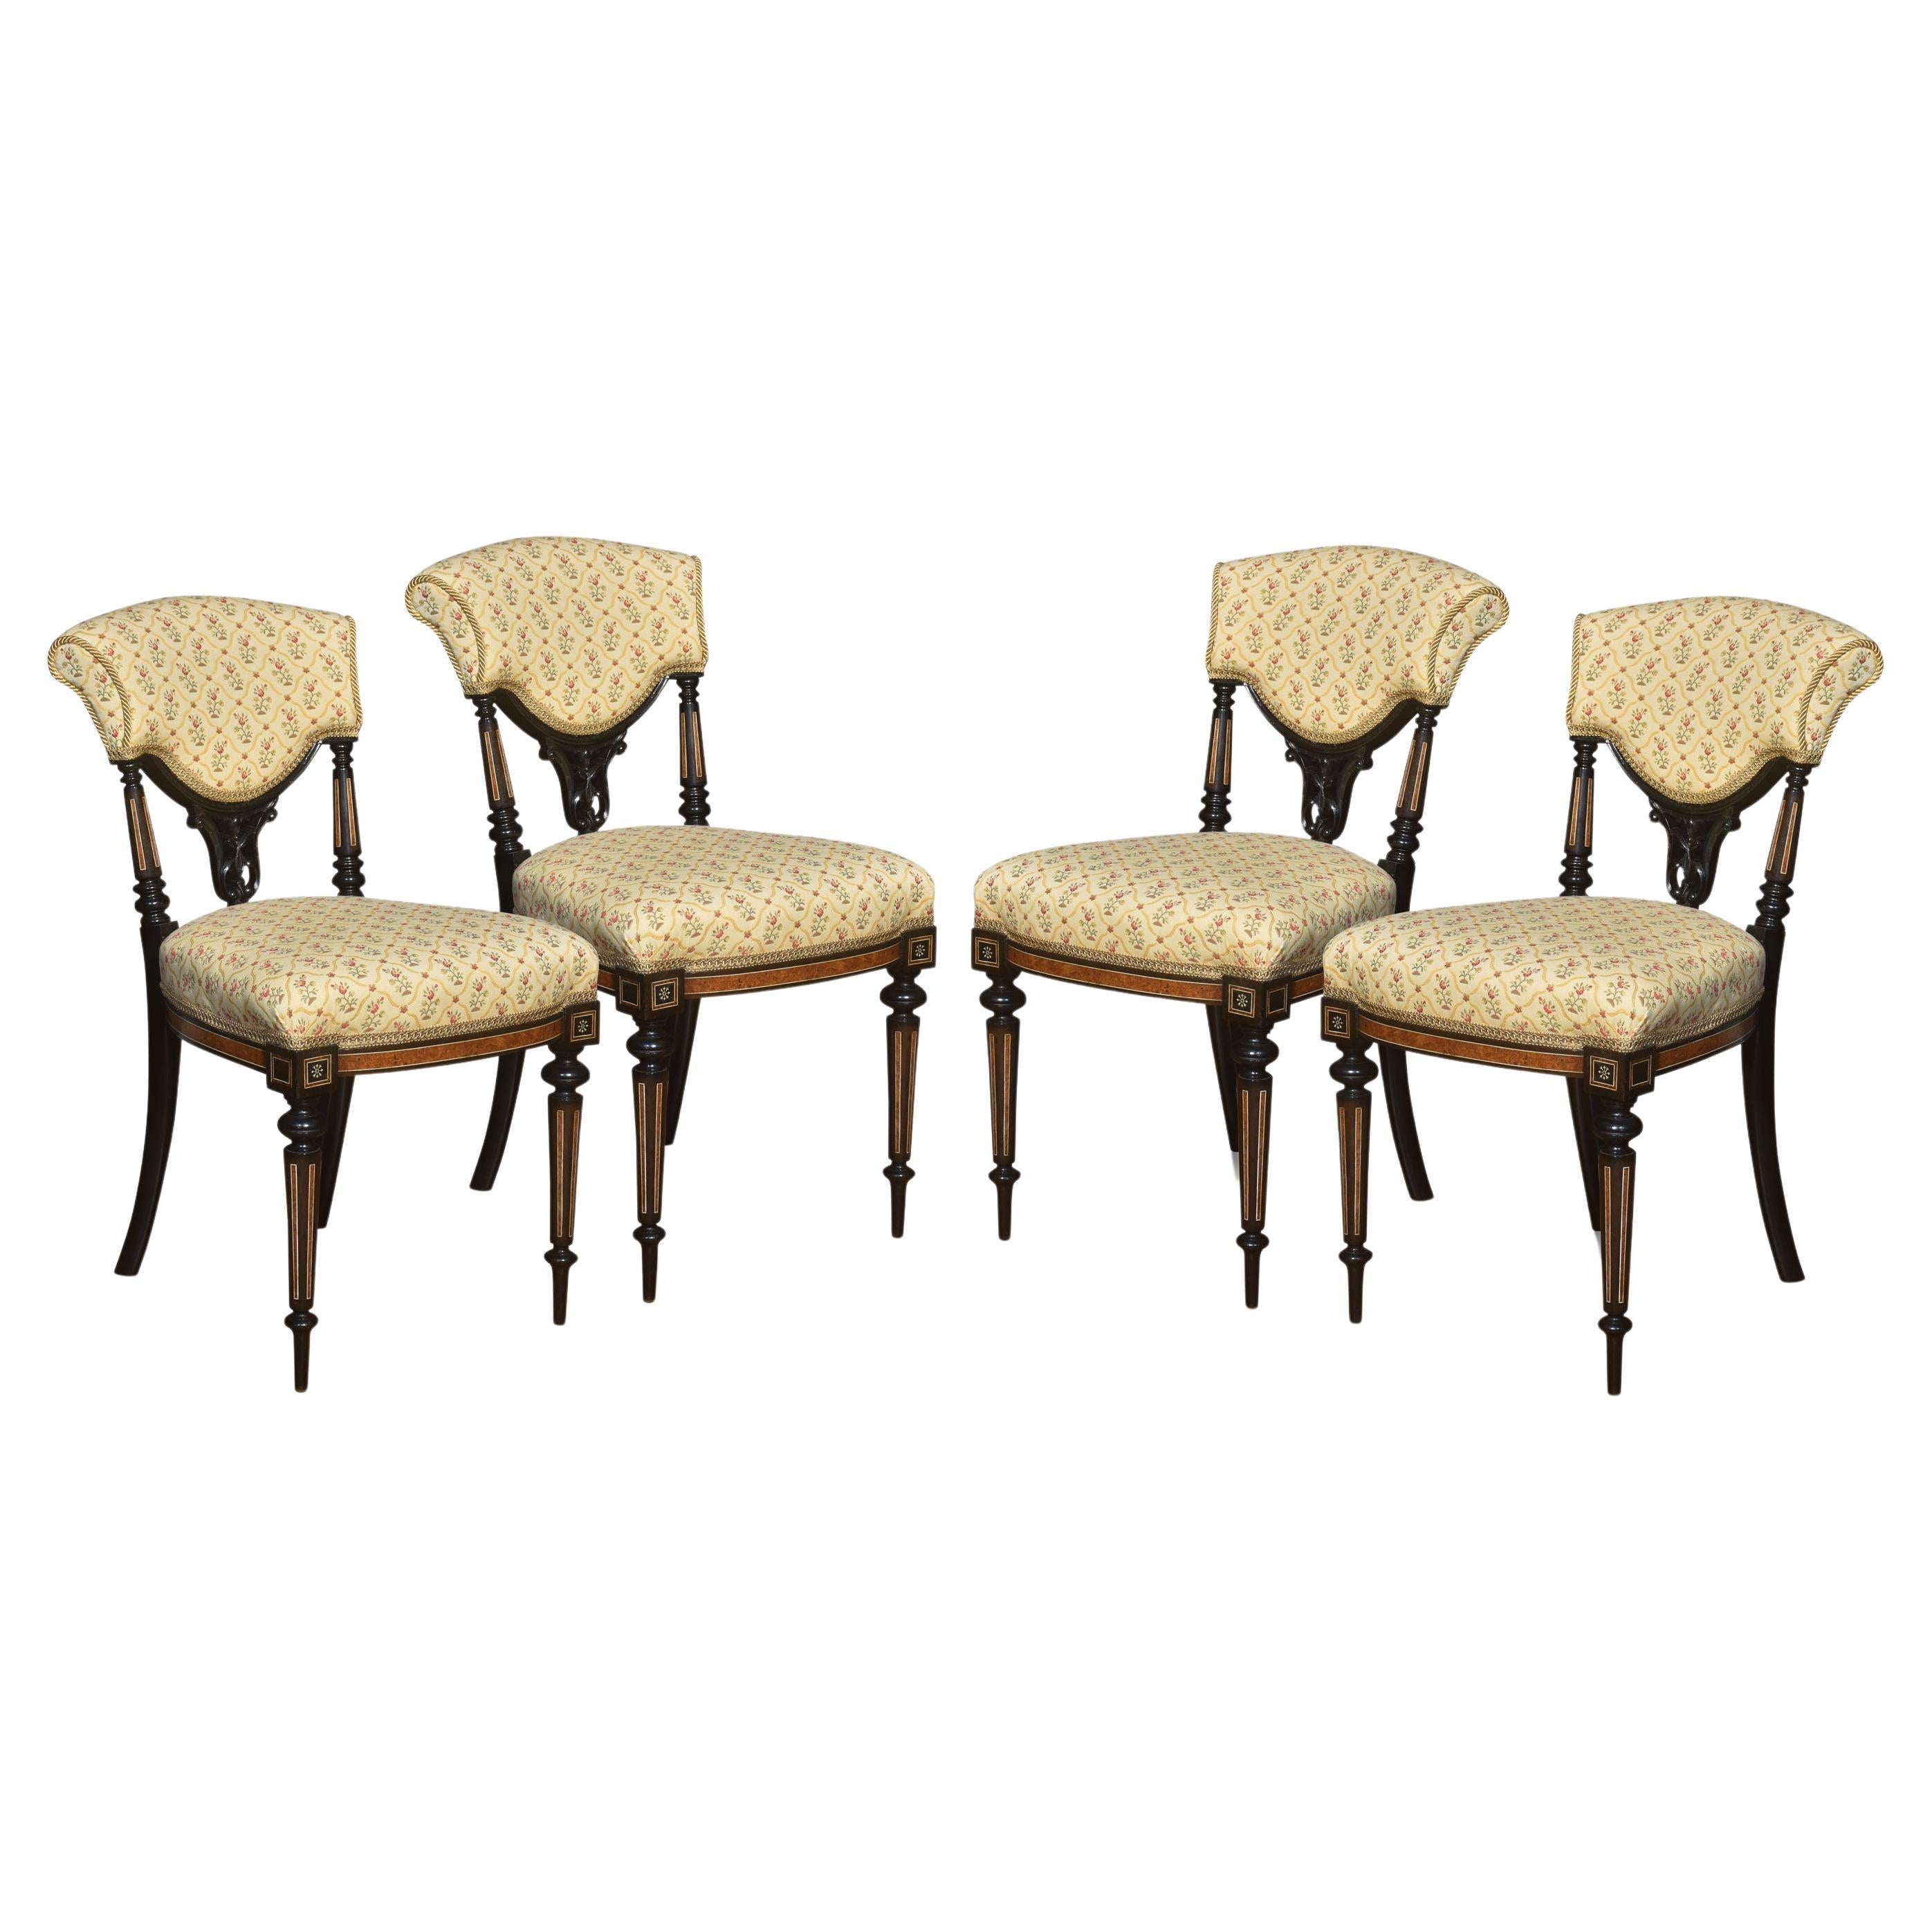 Set of four ebony and amboyna side chairs